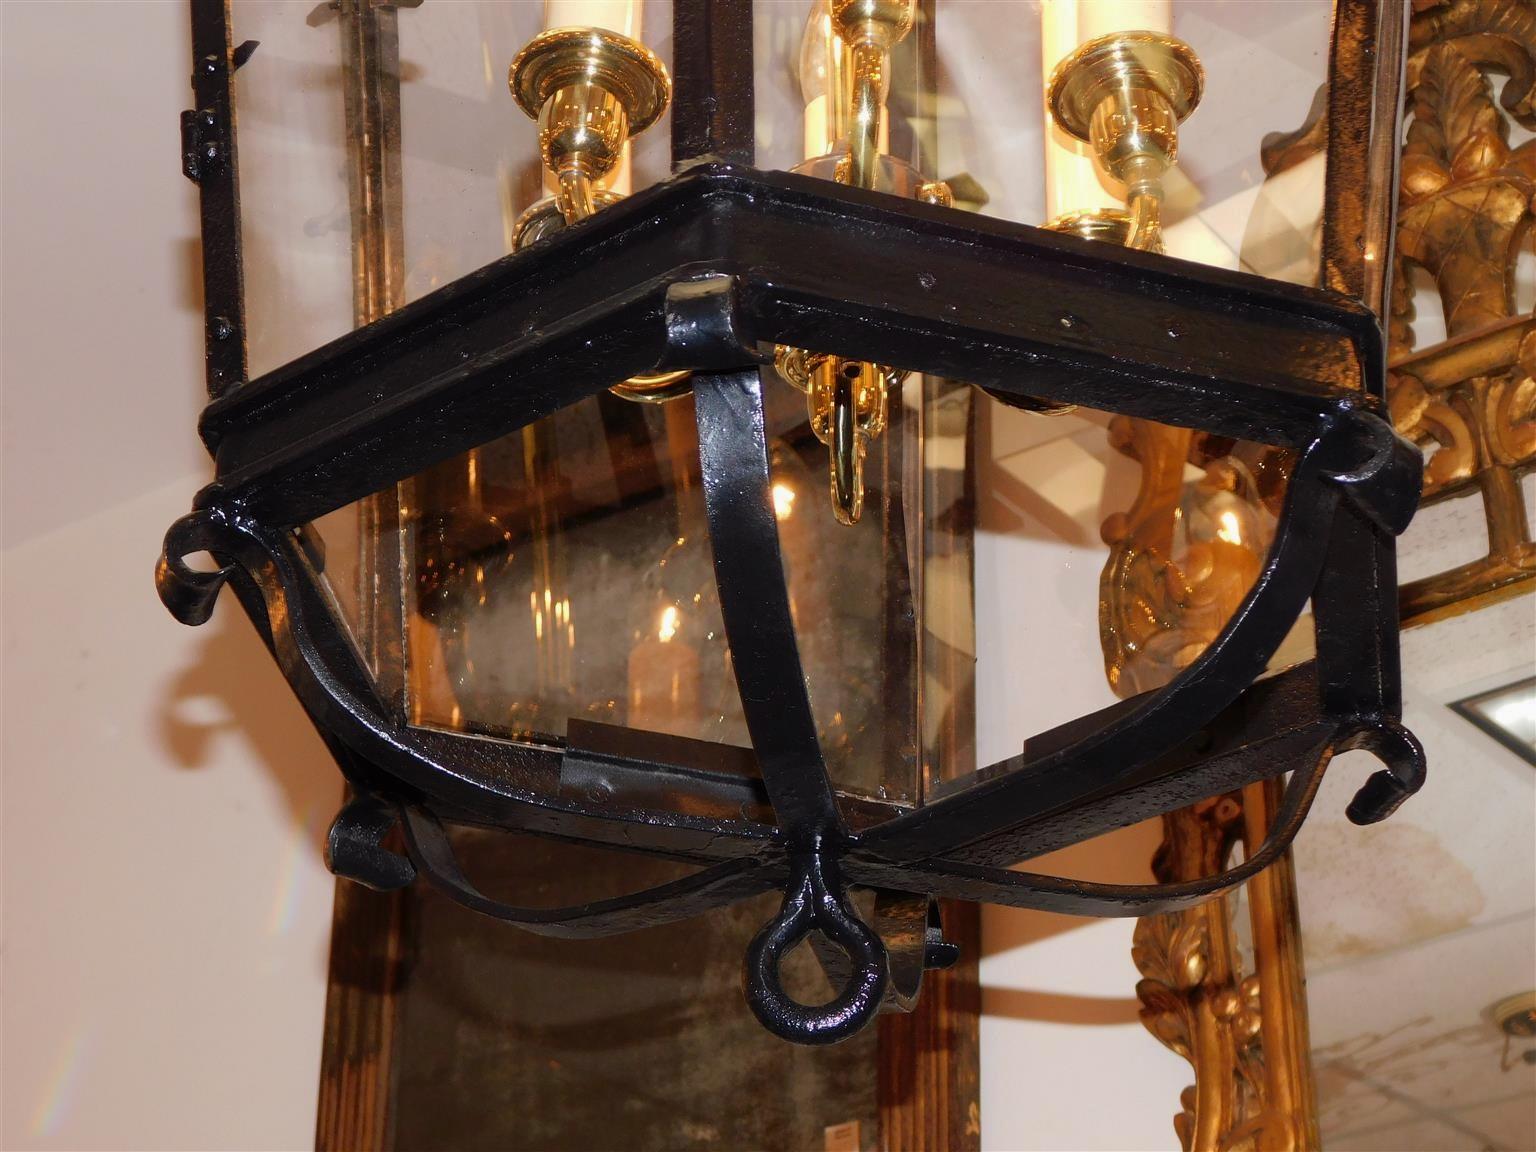 Pair of American Wrought Iron & Brass Dome Shaped Hanging Lanterns, Circa 1820 For Sale 1